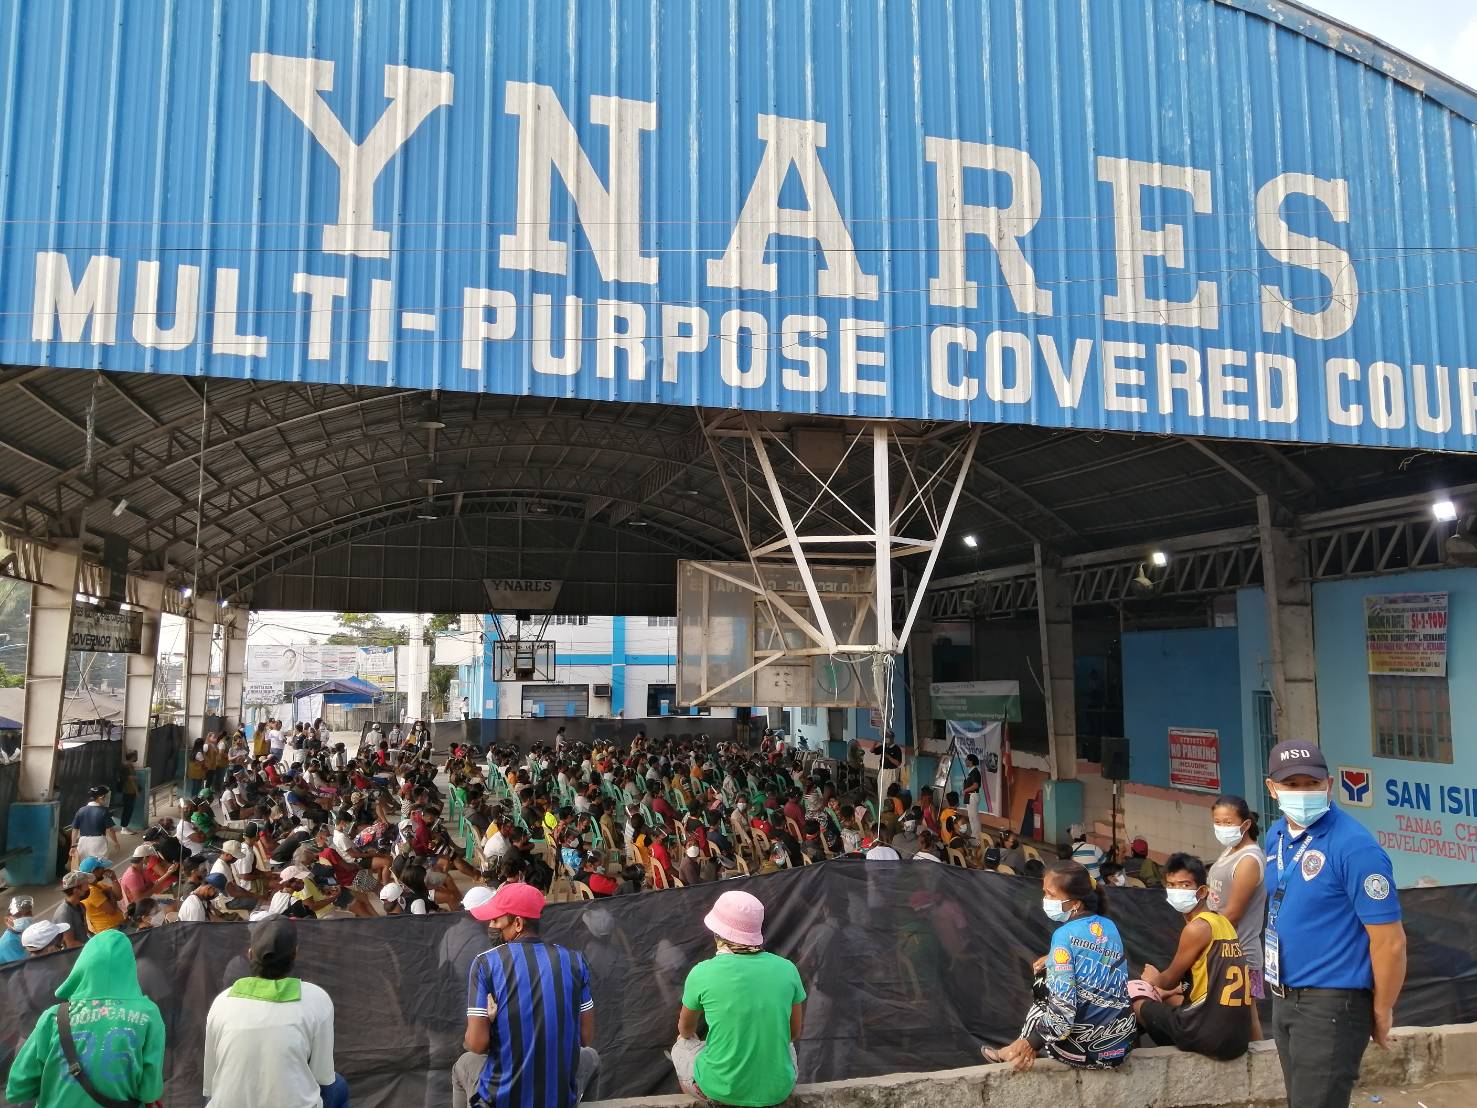 Montalban, Rizal’s scavengers arrived in three batches at the Ynares Multi-Purpose Covered Court. 